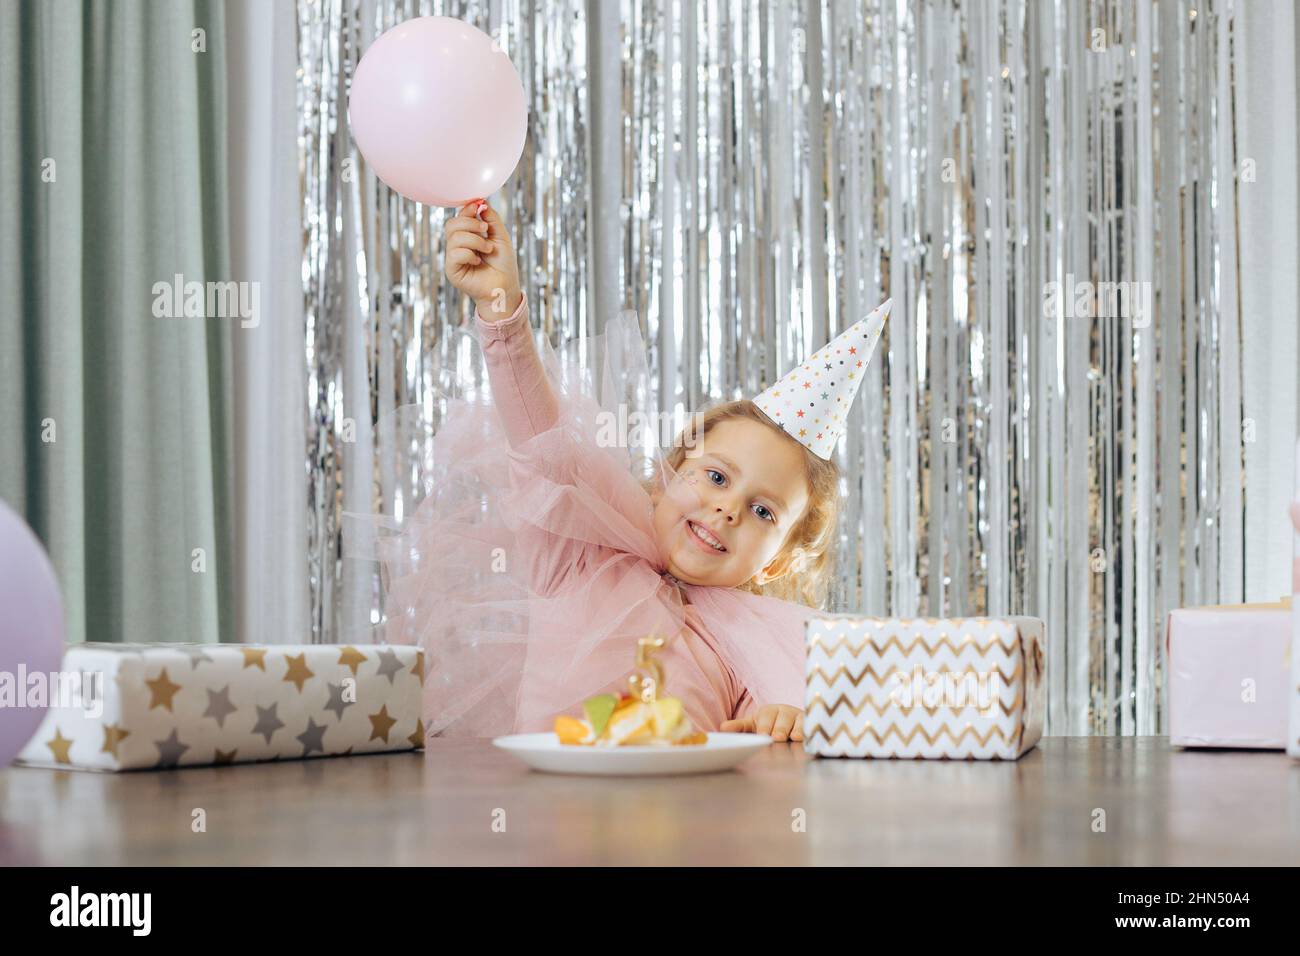 Cute little smiling girl with short curly hair and stars on face in pink poofy dress lift pink balloon near fruit cake. Stock Photo